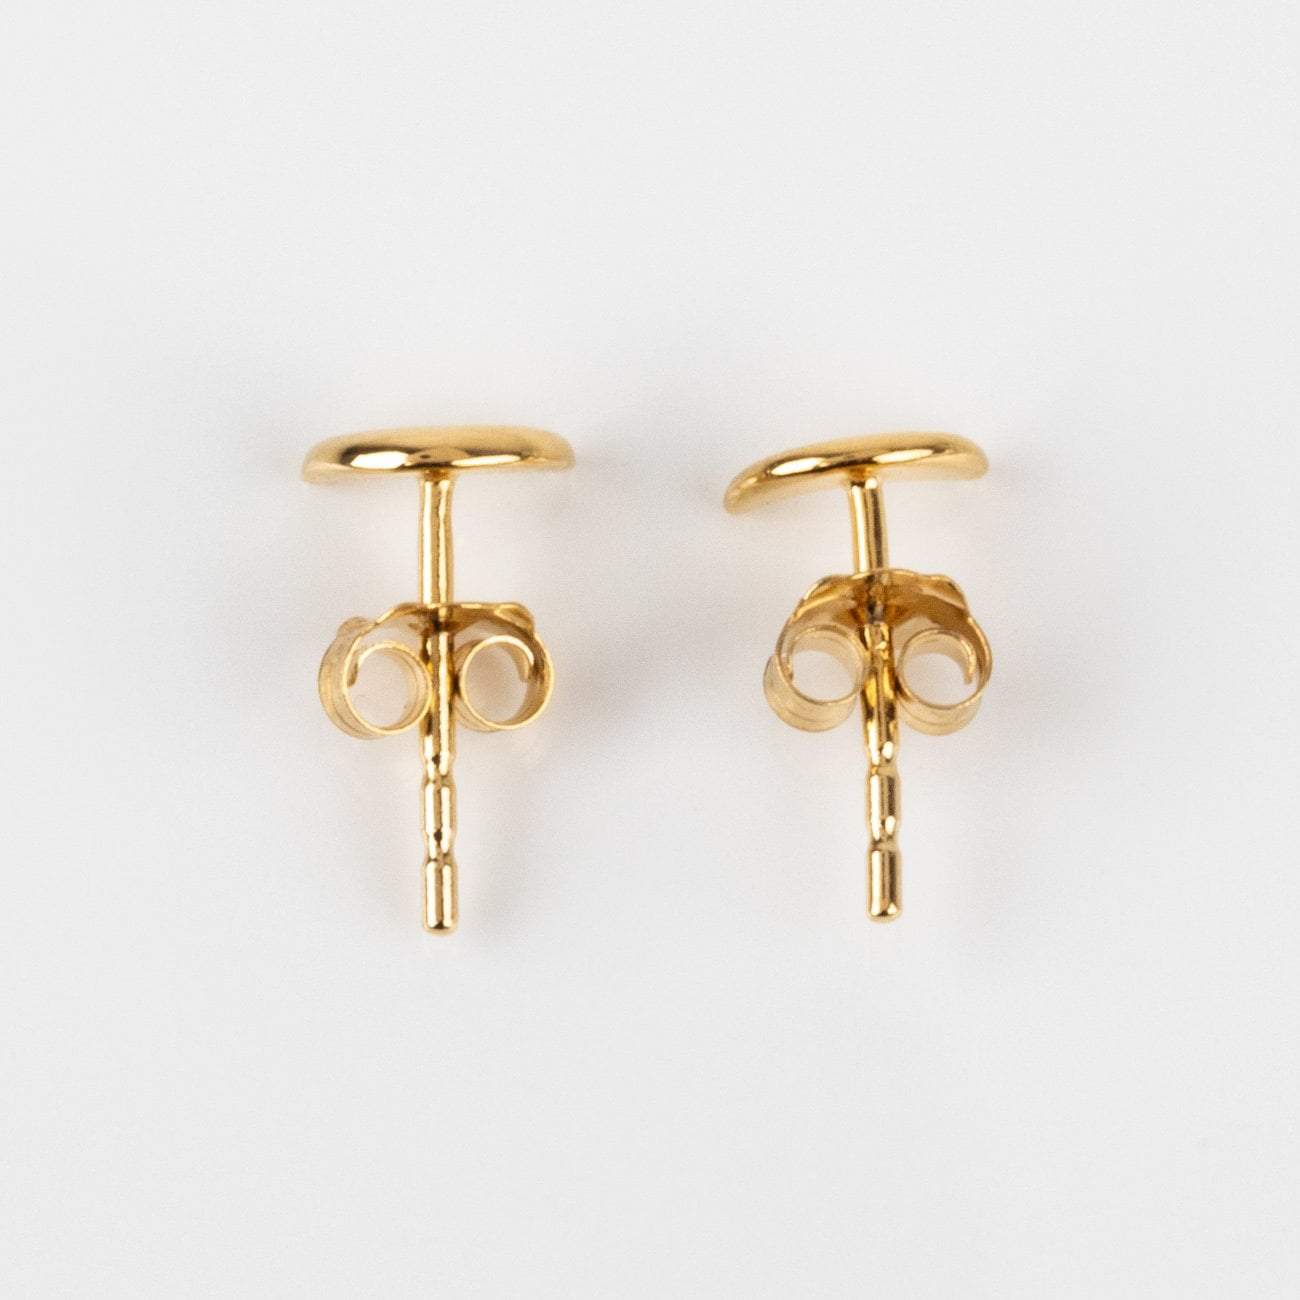 Solid Yellow Gold Moon Mini Stud Earrings Family Gold Fine Jewelry